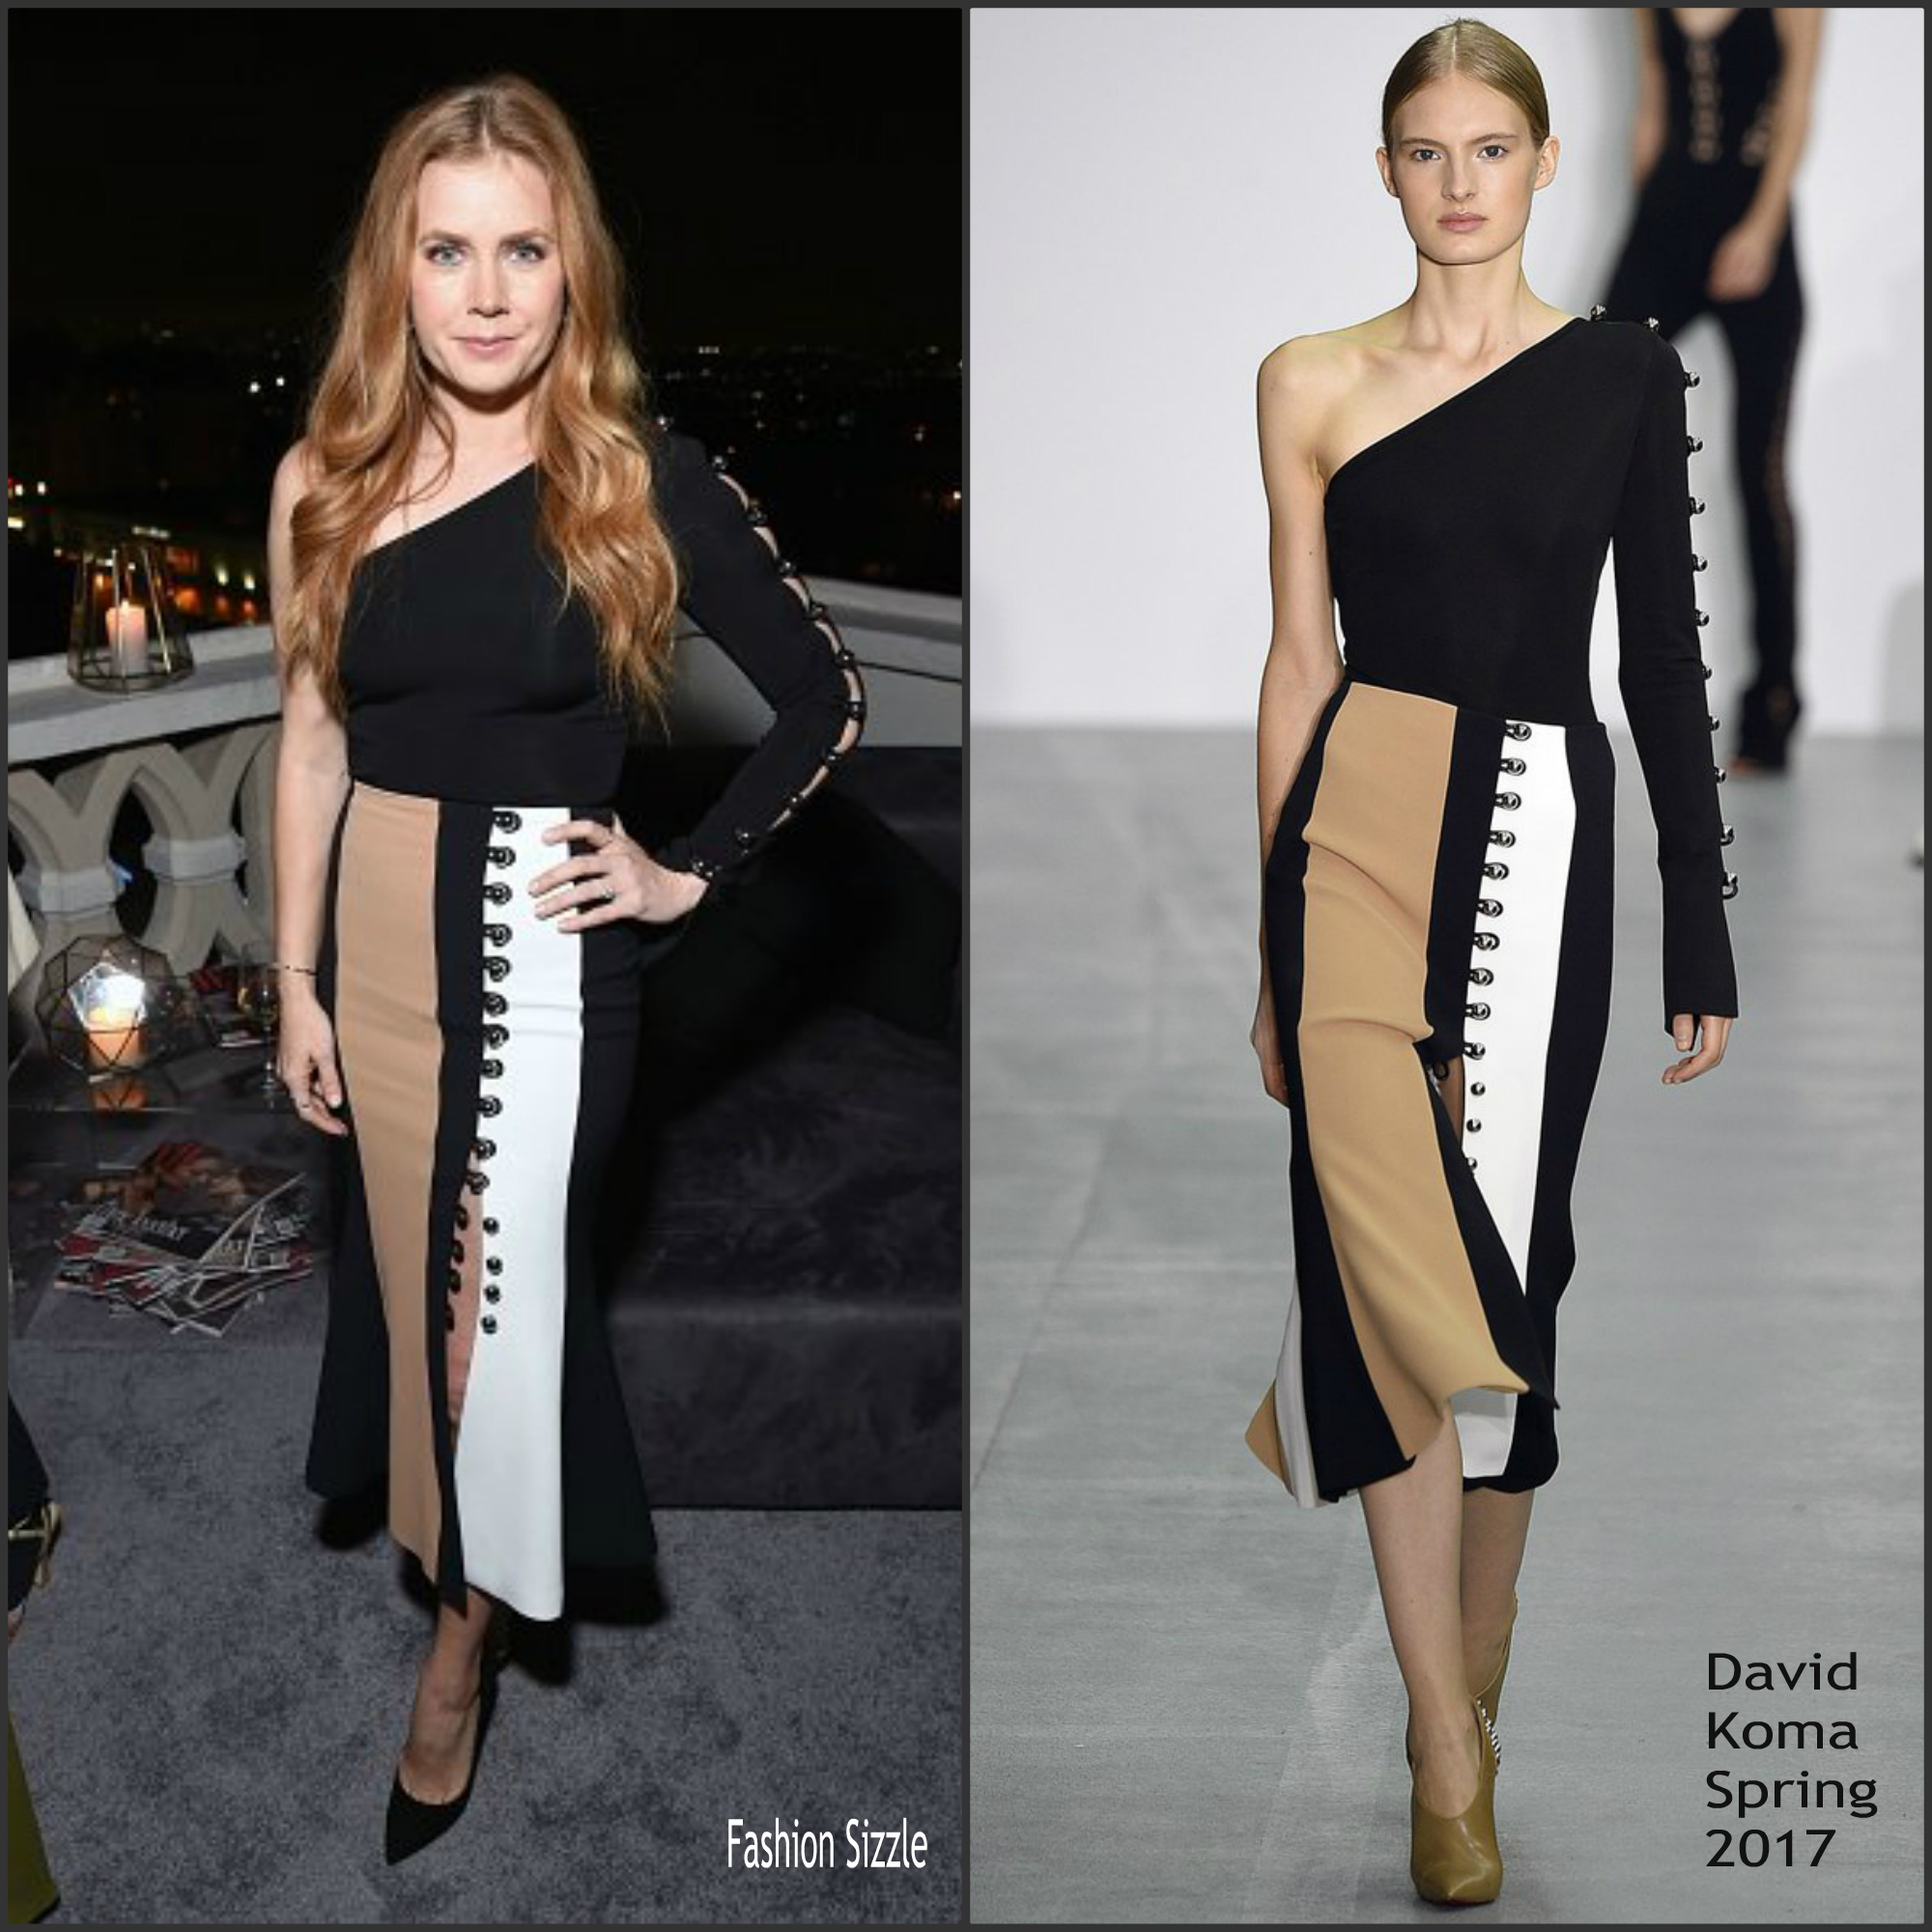 amy-adams-in-david-koma-at-w-magazine-golden-globes-party-2017